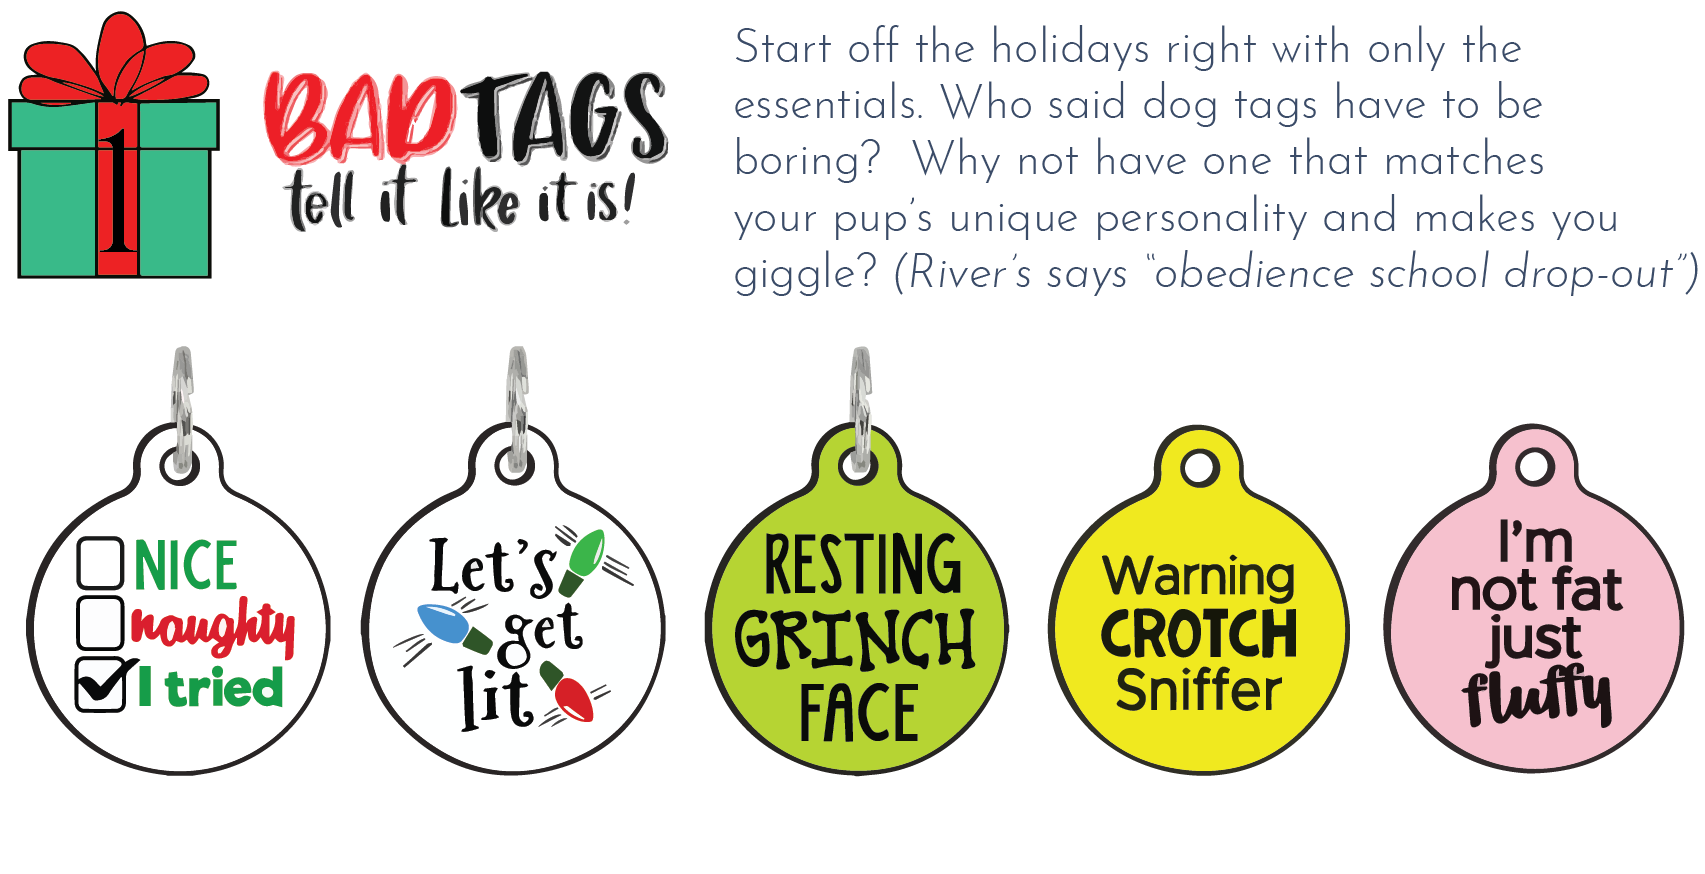 Bad Tags - Whyld River top 5 holiday gifts for dog lovers